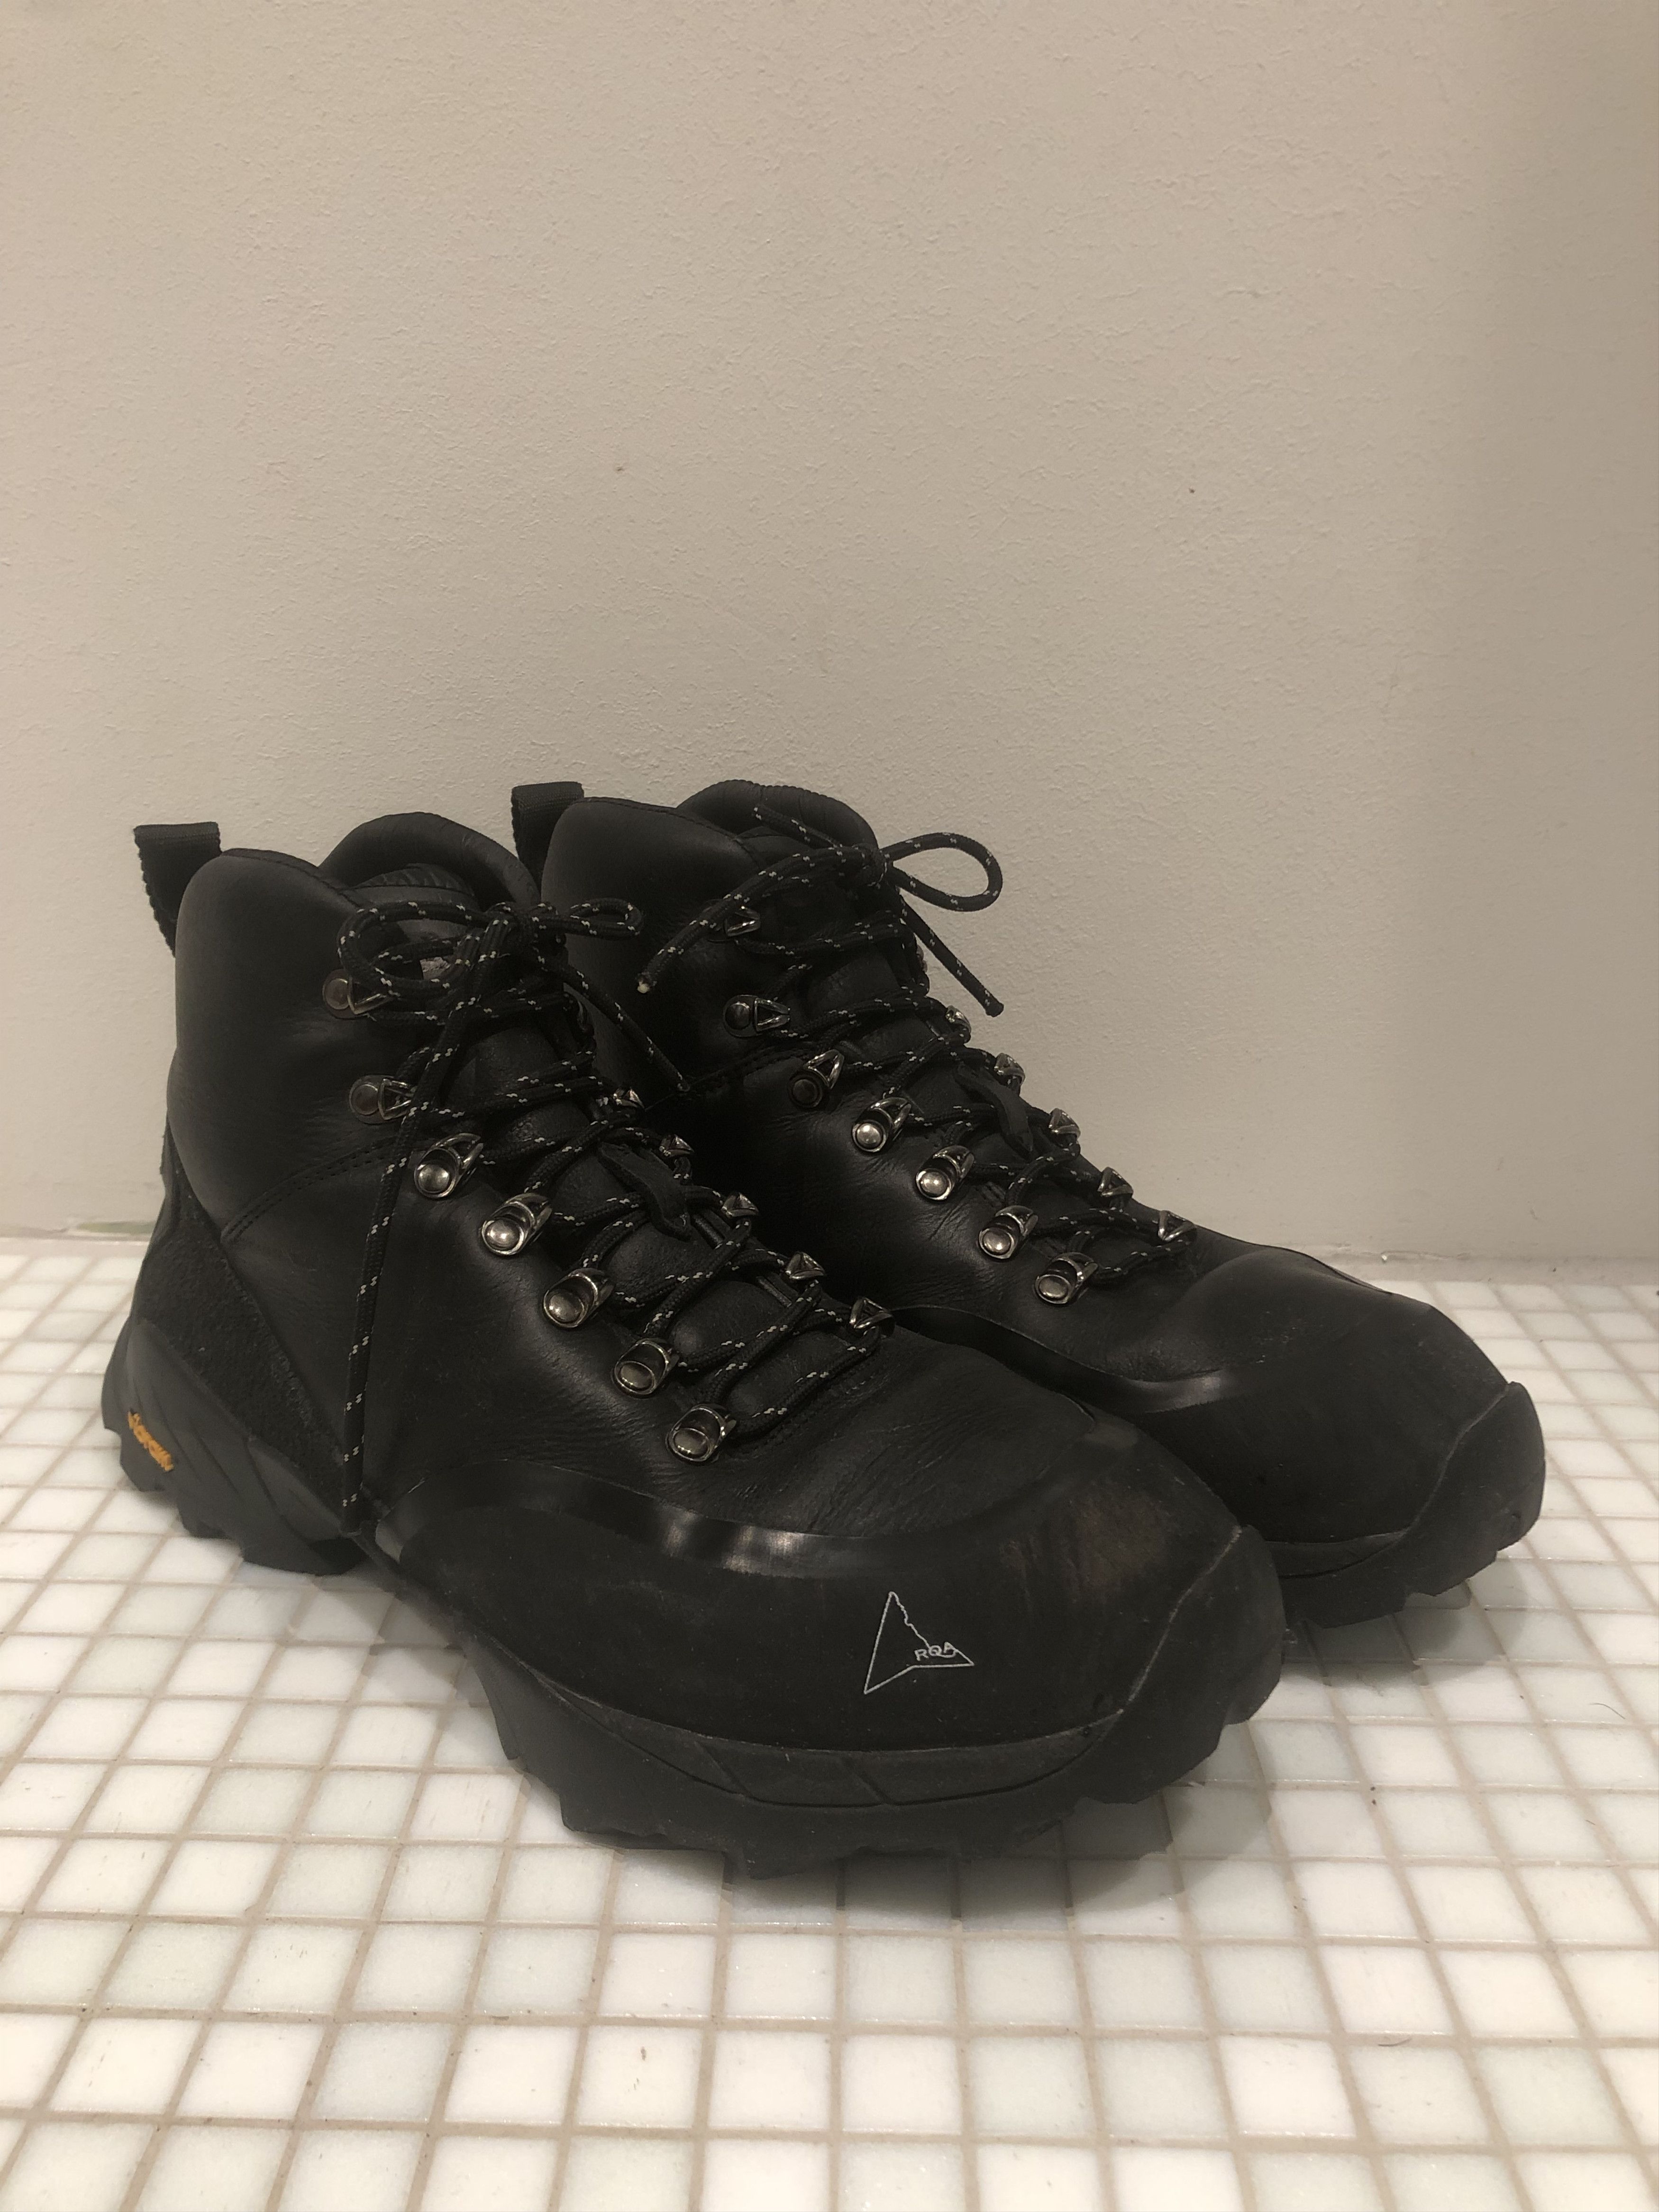 ROA Kudu Leather Andreas Hiking Boots | Grailed